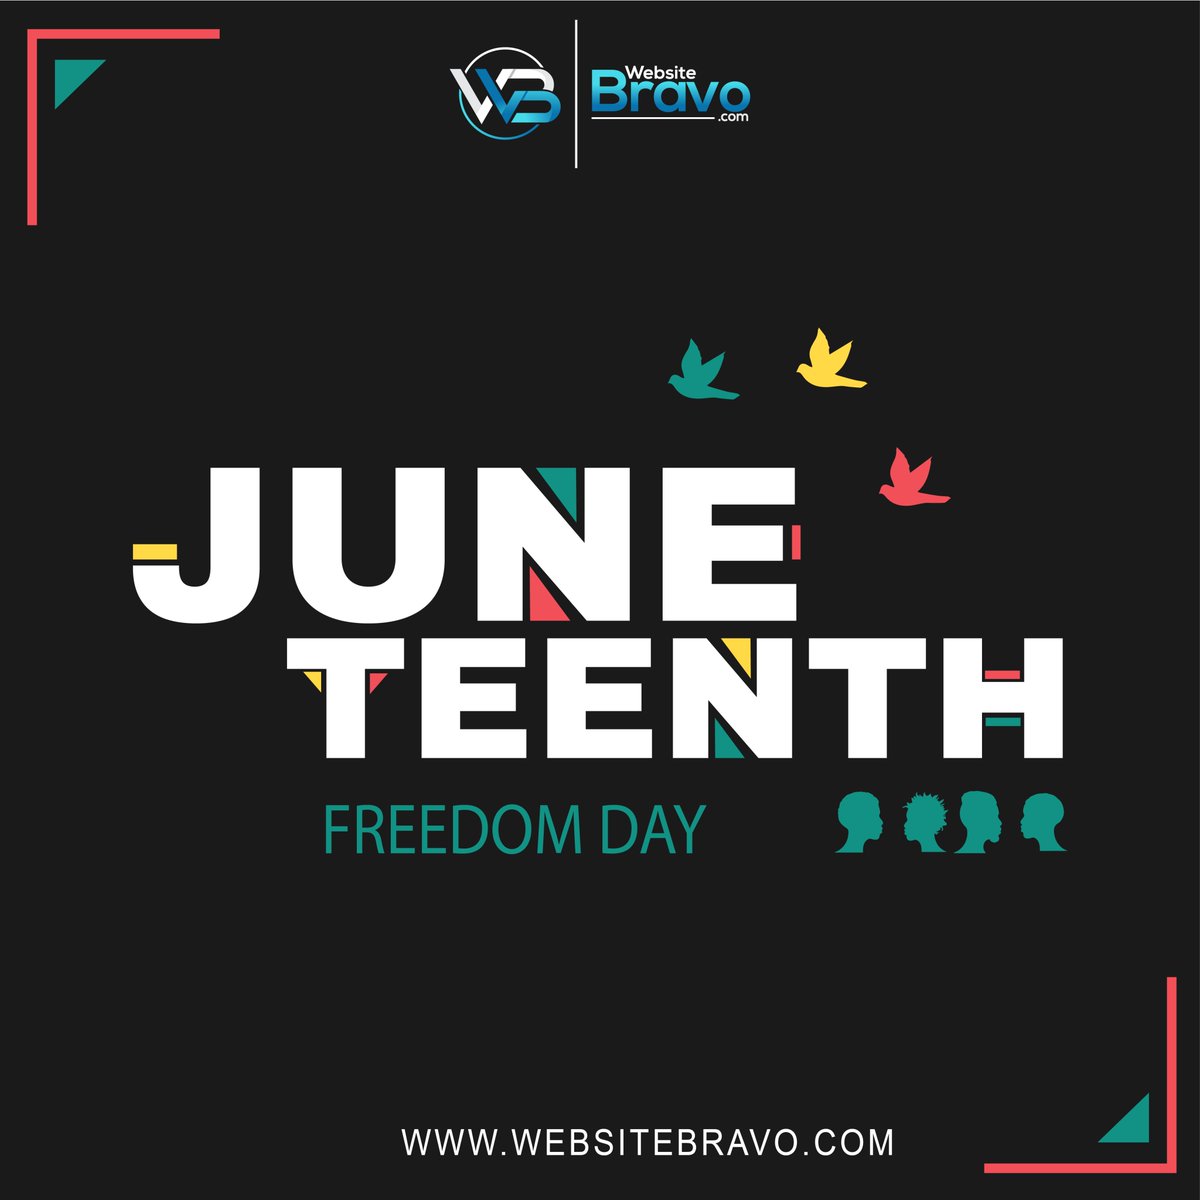 Honoring the past, embracing the present, and empowering the future on Juneteenth.

Contact us, and we will be happy to help you out.
websitebravo.com

#WebsiteBravo #webdevelopmentcompany  #seoagency #Juneteenth #FreedomDay #EmancipationCelebration #LiberationDay